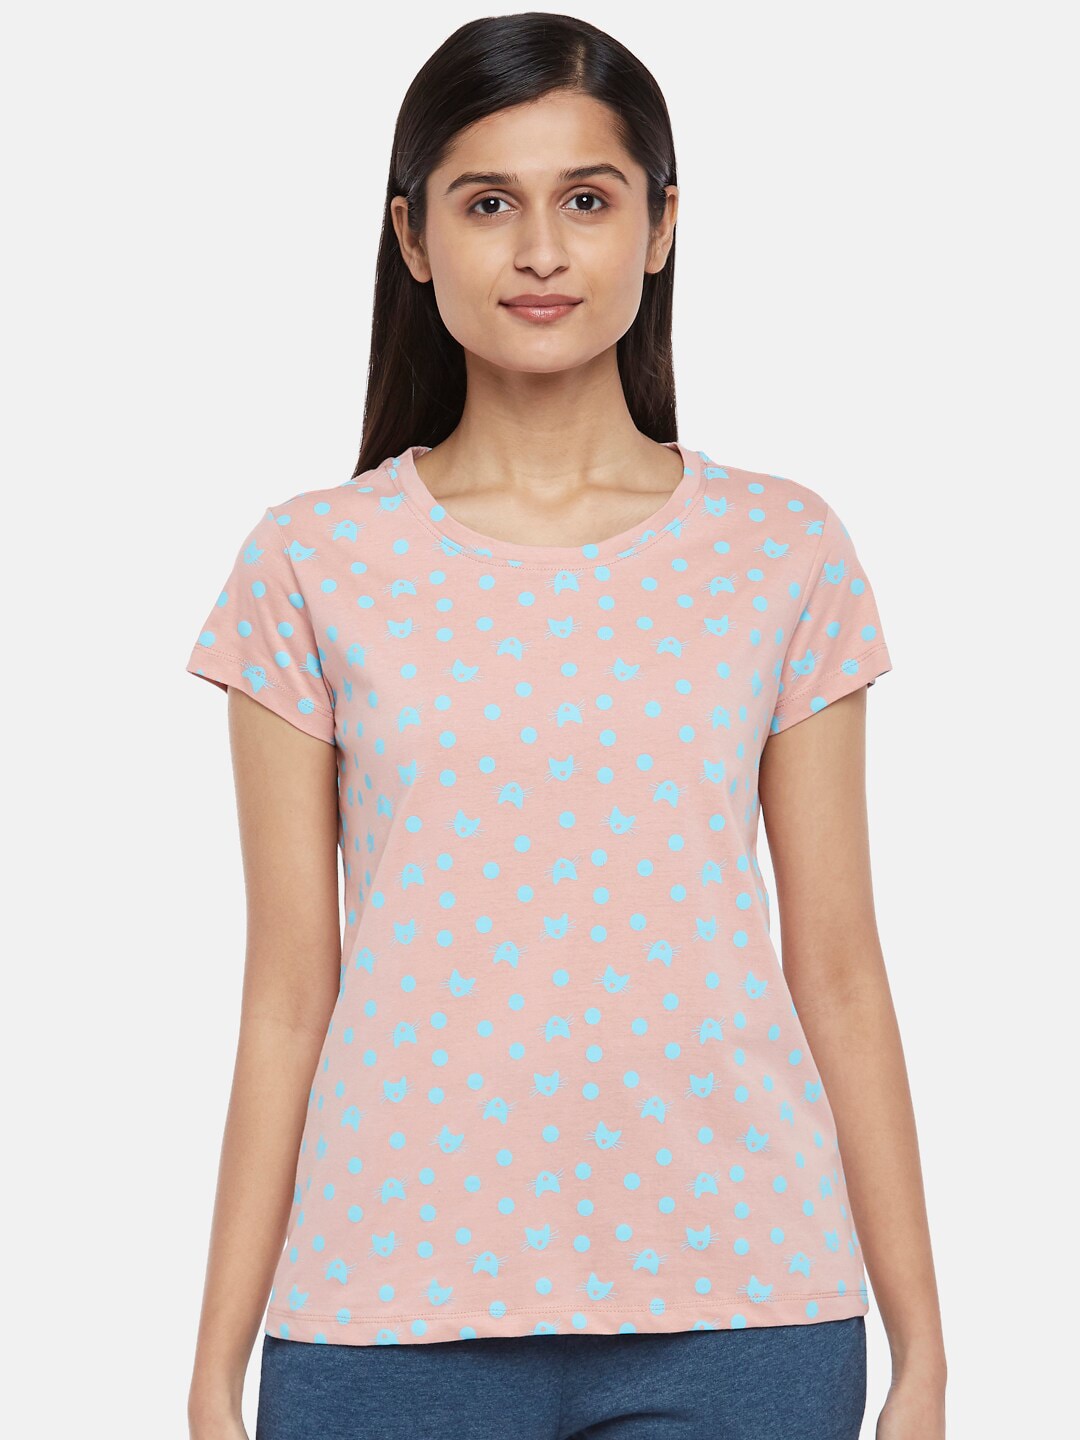 Dreamz by Pantaloons Coral Floral Print Round Neck Regular Lounge tshirt Price in India